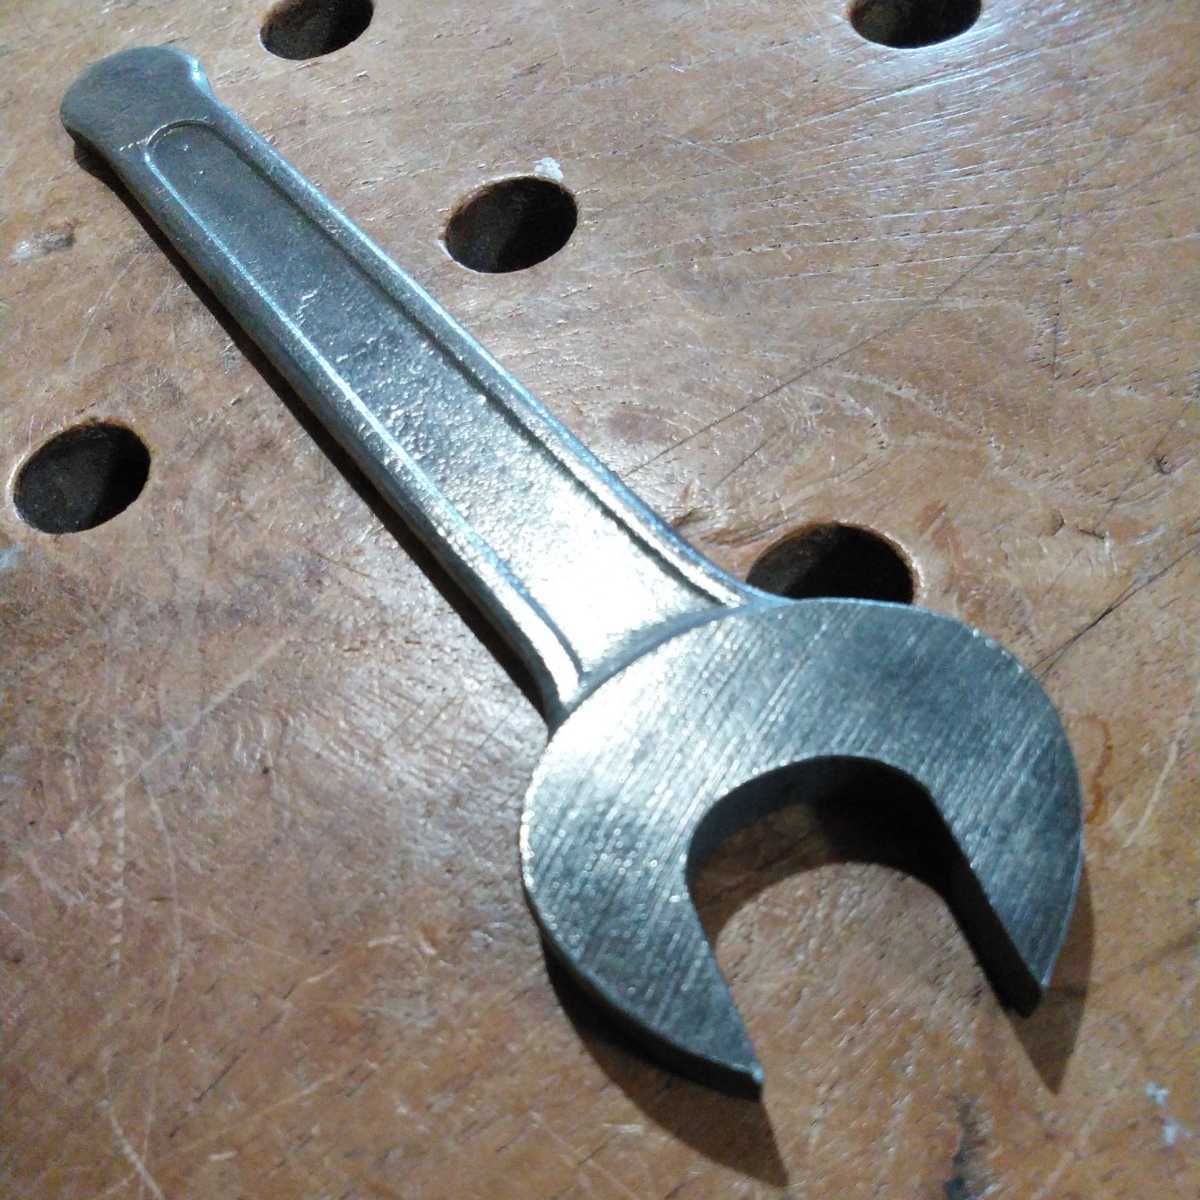  Suzuki loaded tool maintenance for tool one-side . wrench size inscription 17mm. old Logo S total length 137.2mm. tire lever equipped rare article 